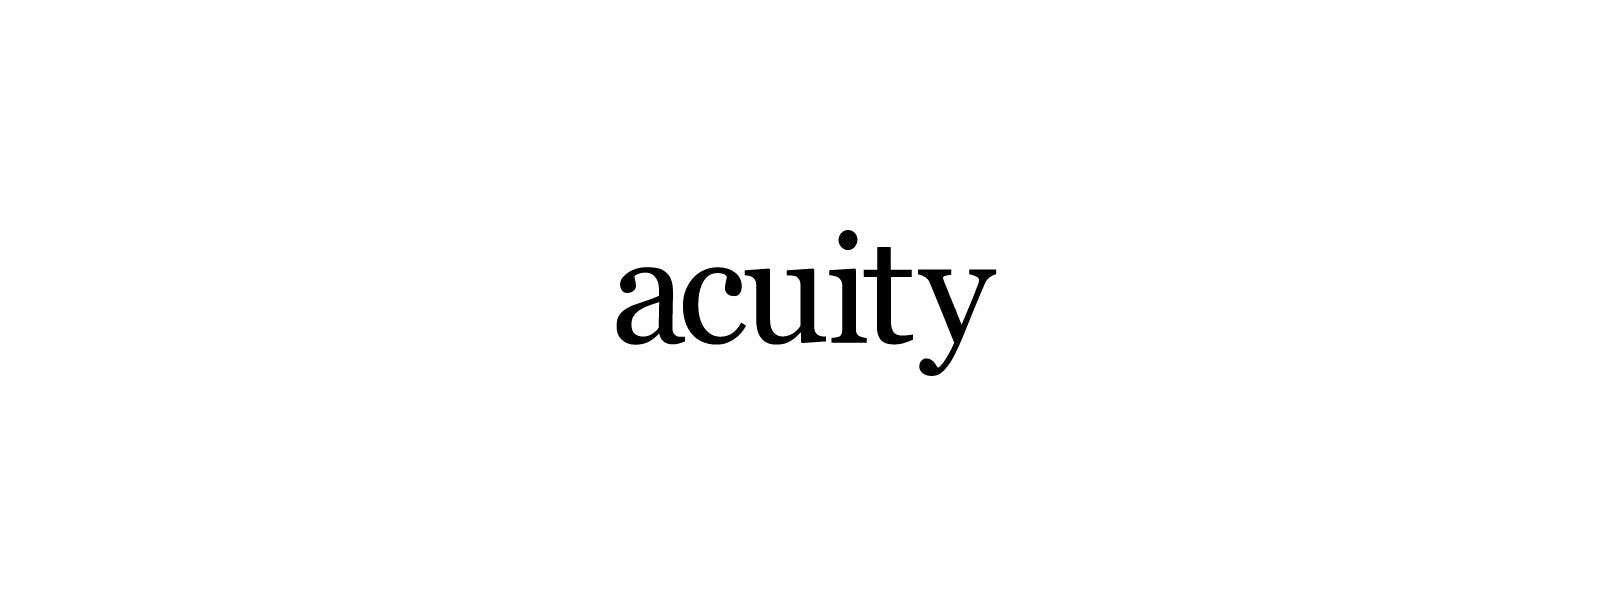 Acuity – Taking on the World